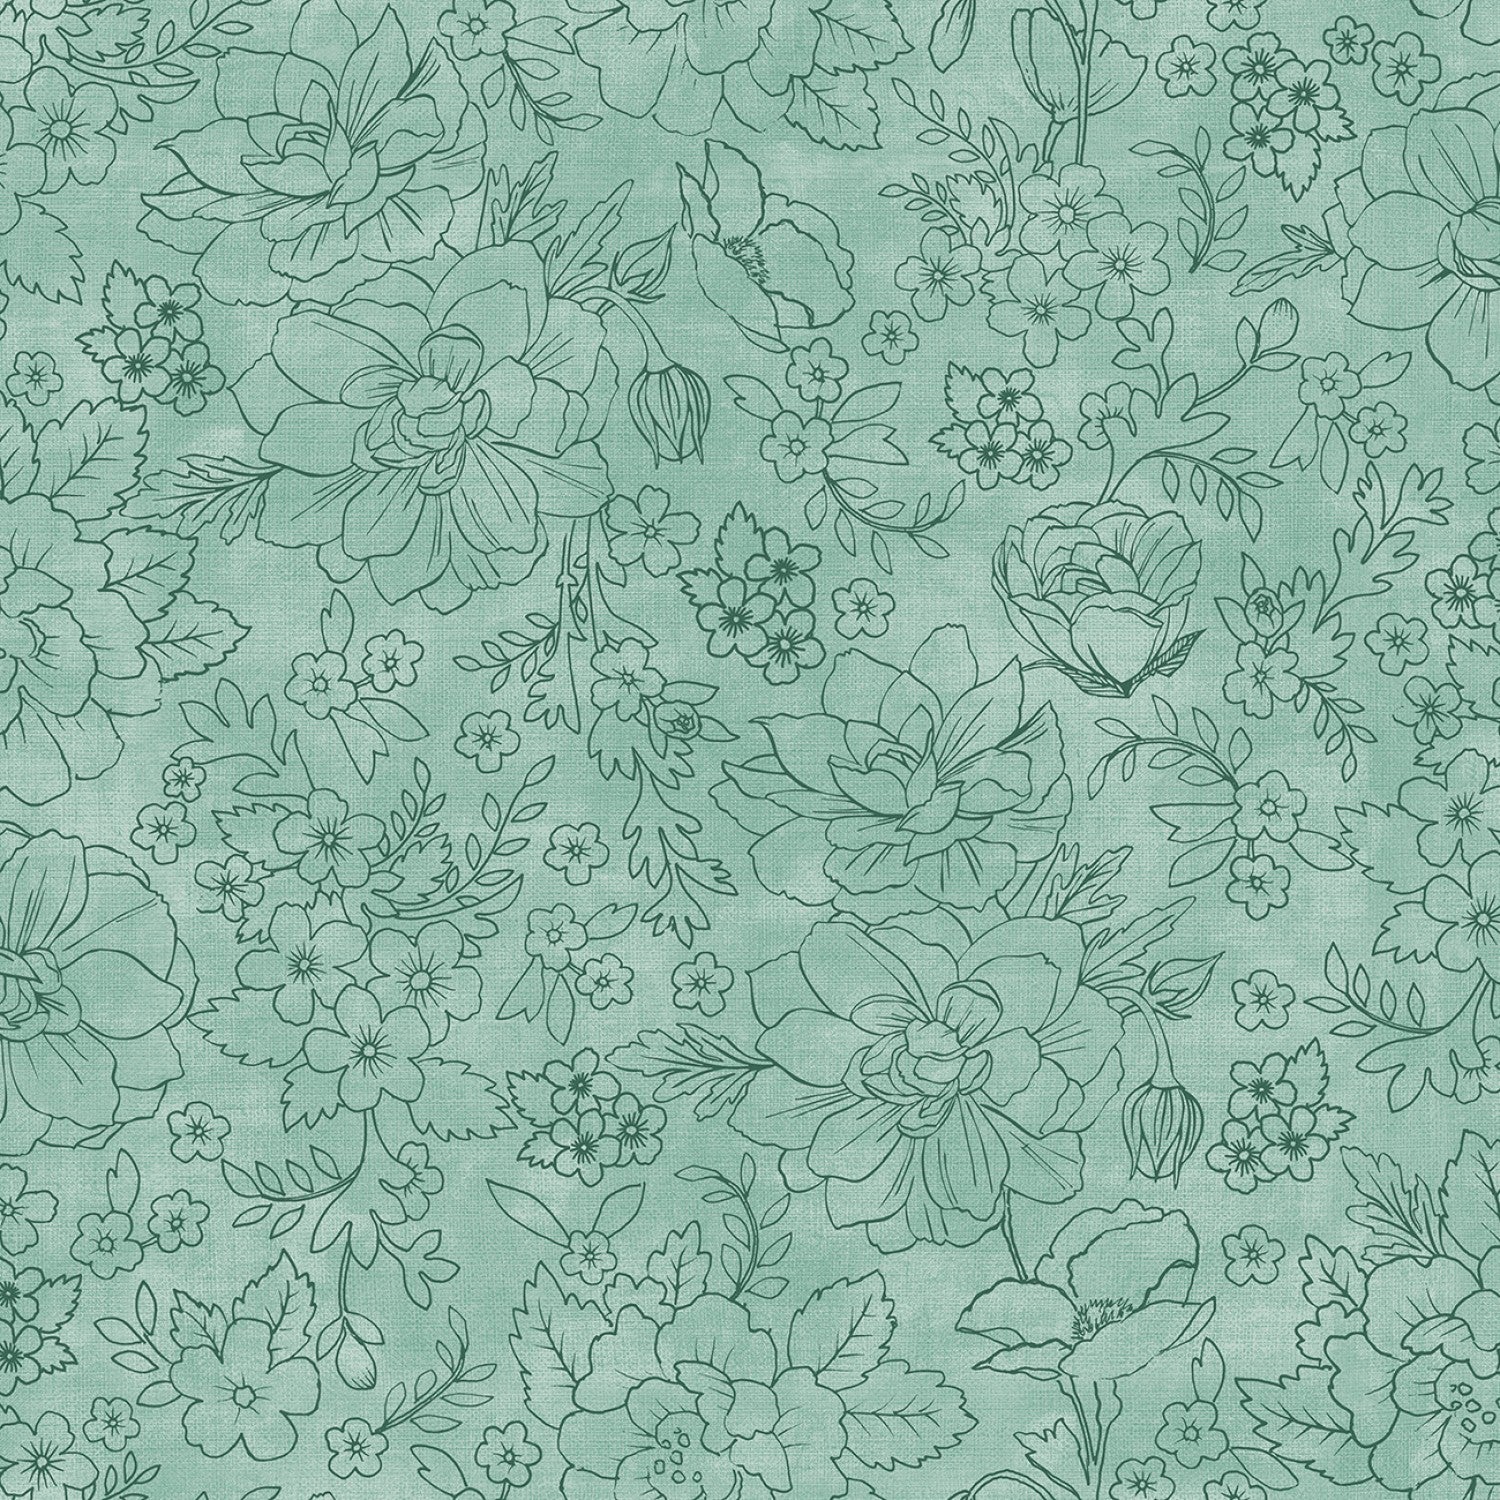 Lilac & Sage by Punch Studio for RJR Fabrics - Mint Toile PS104-M17